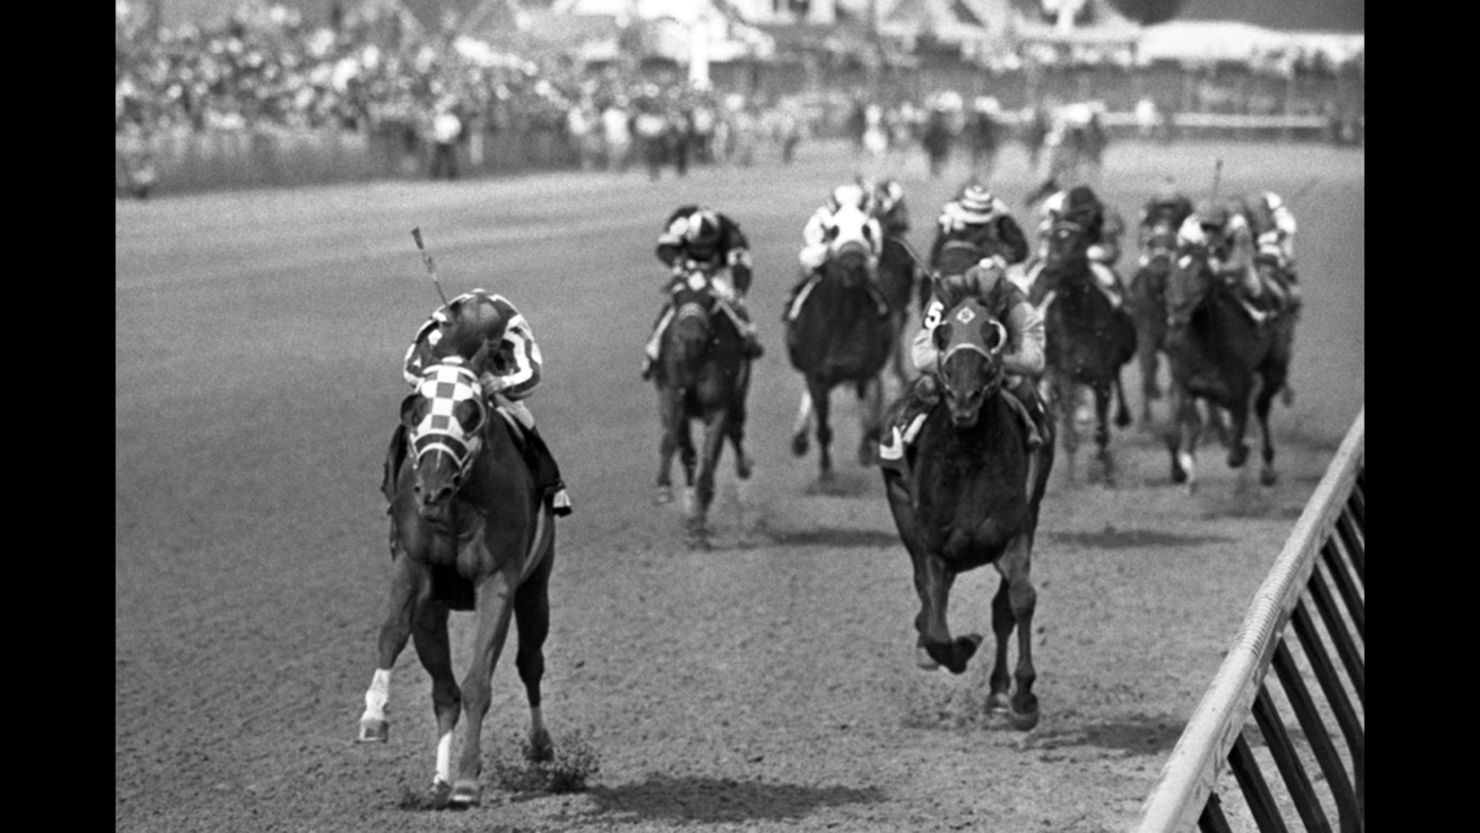 Secretariat races towards the finish line during the 99th Kentucky Derby on May 5, 1973 at Churchill Downs.